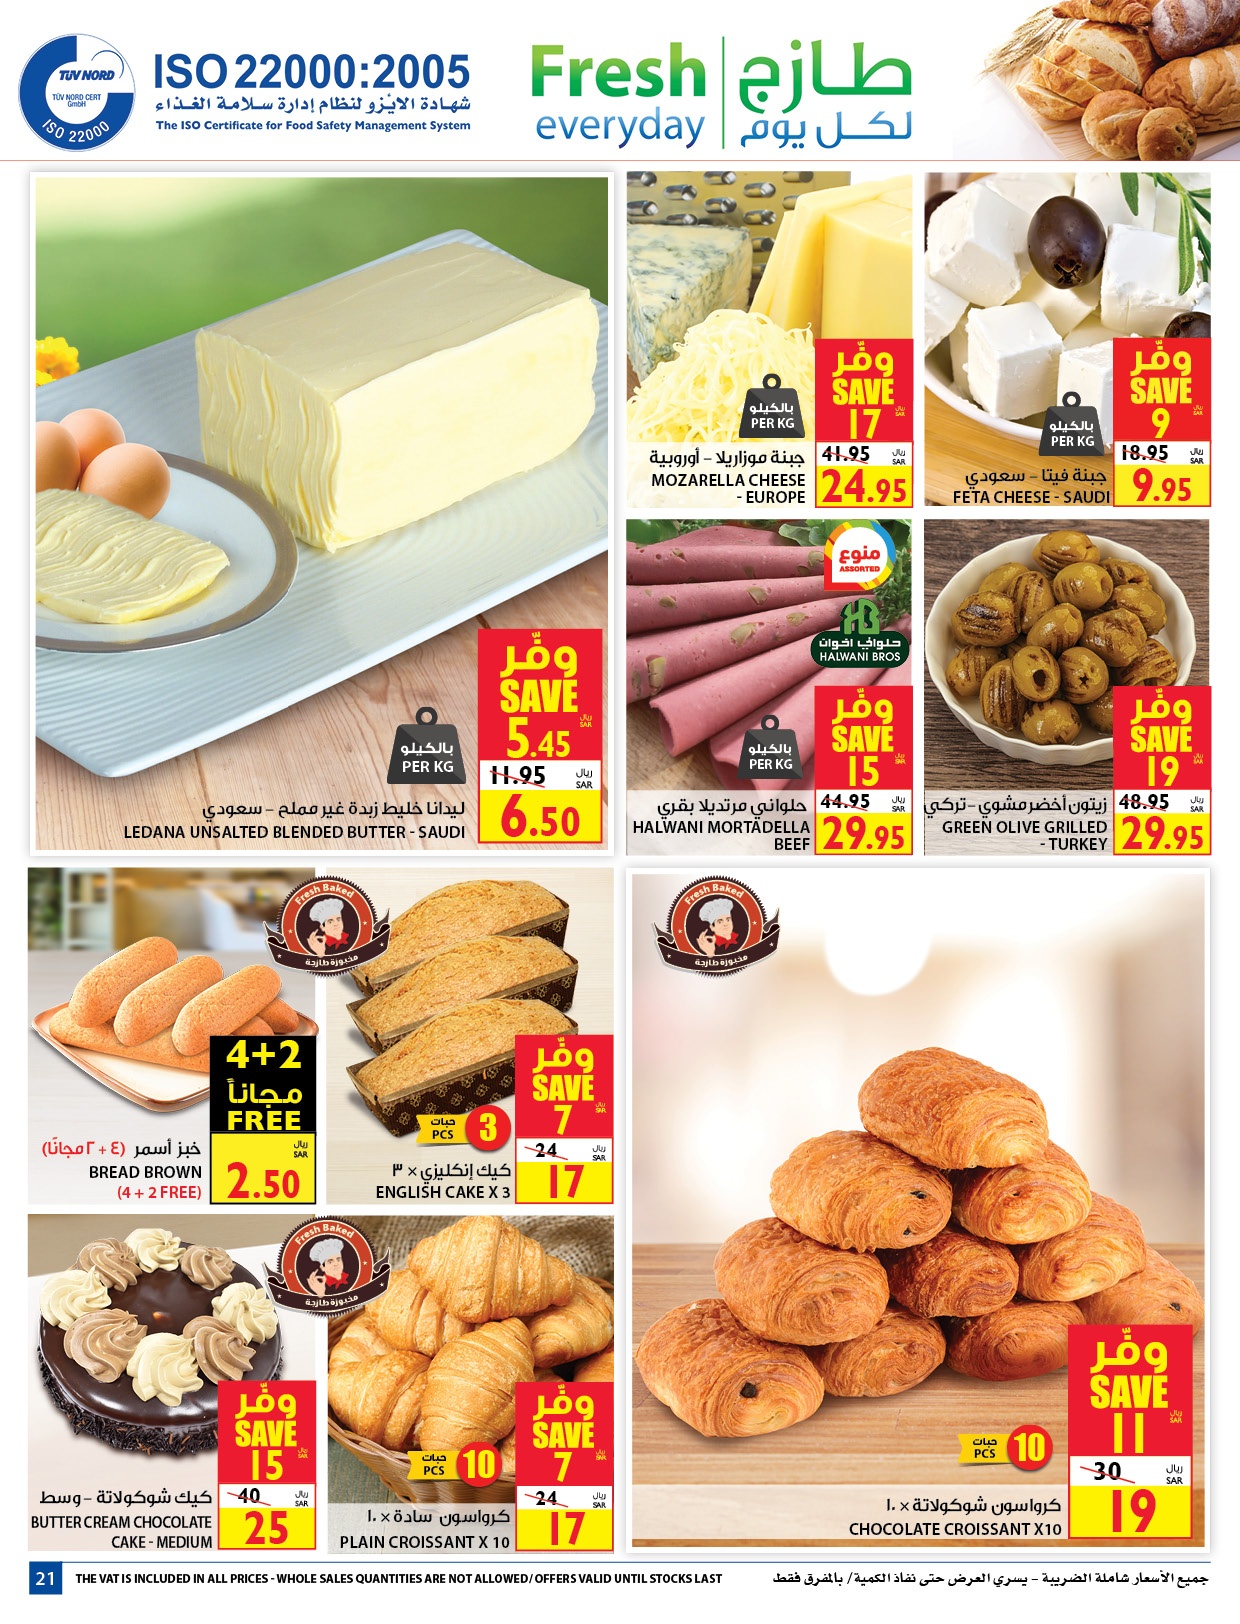 Carrefour Festival Offers from 12/8 till 25/8 | Carrefour KSA 24